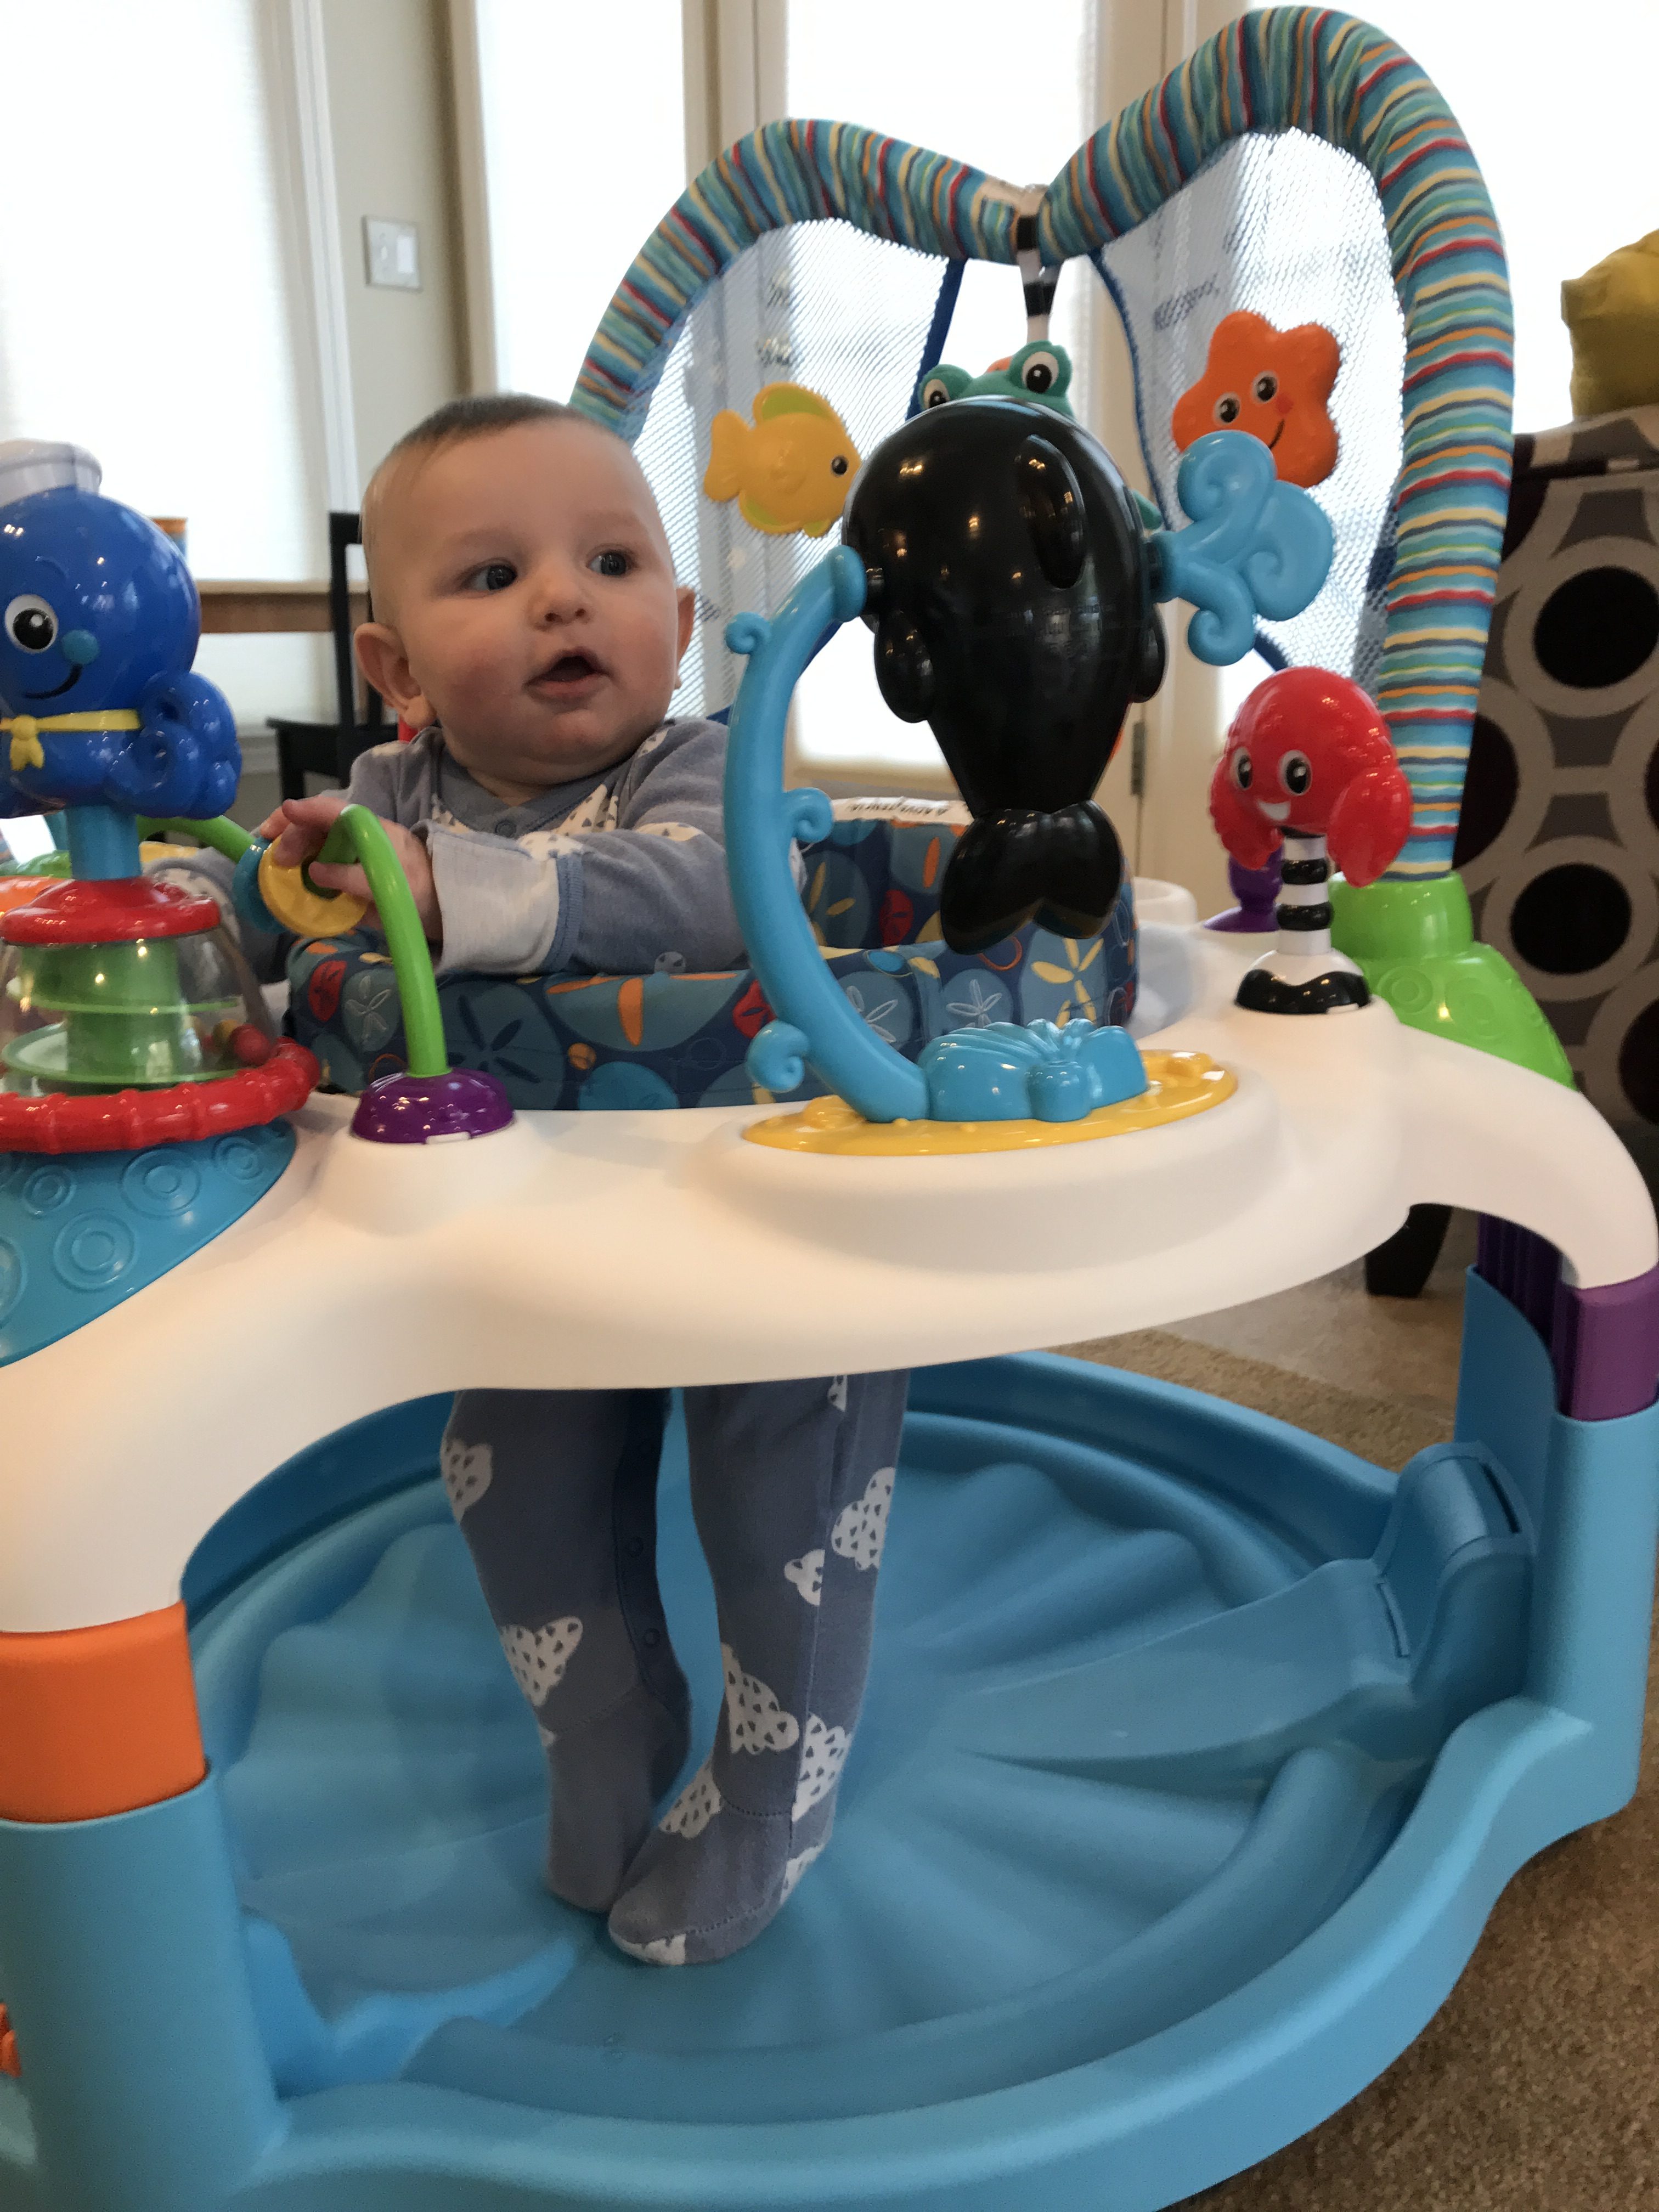 age to use exersaucer